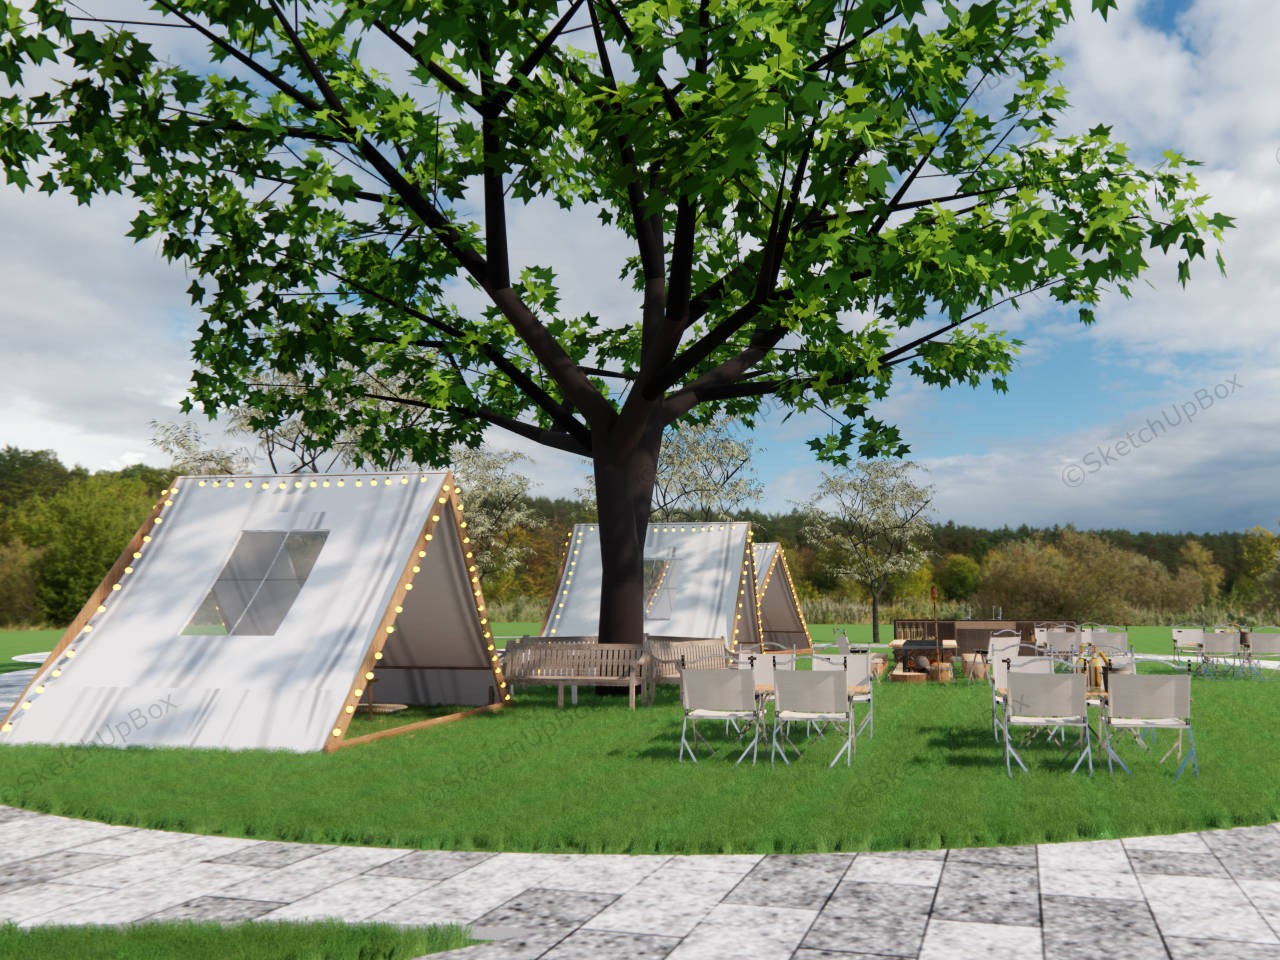 Glamping Site With Tents sketchup model preview - SketchupBox